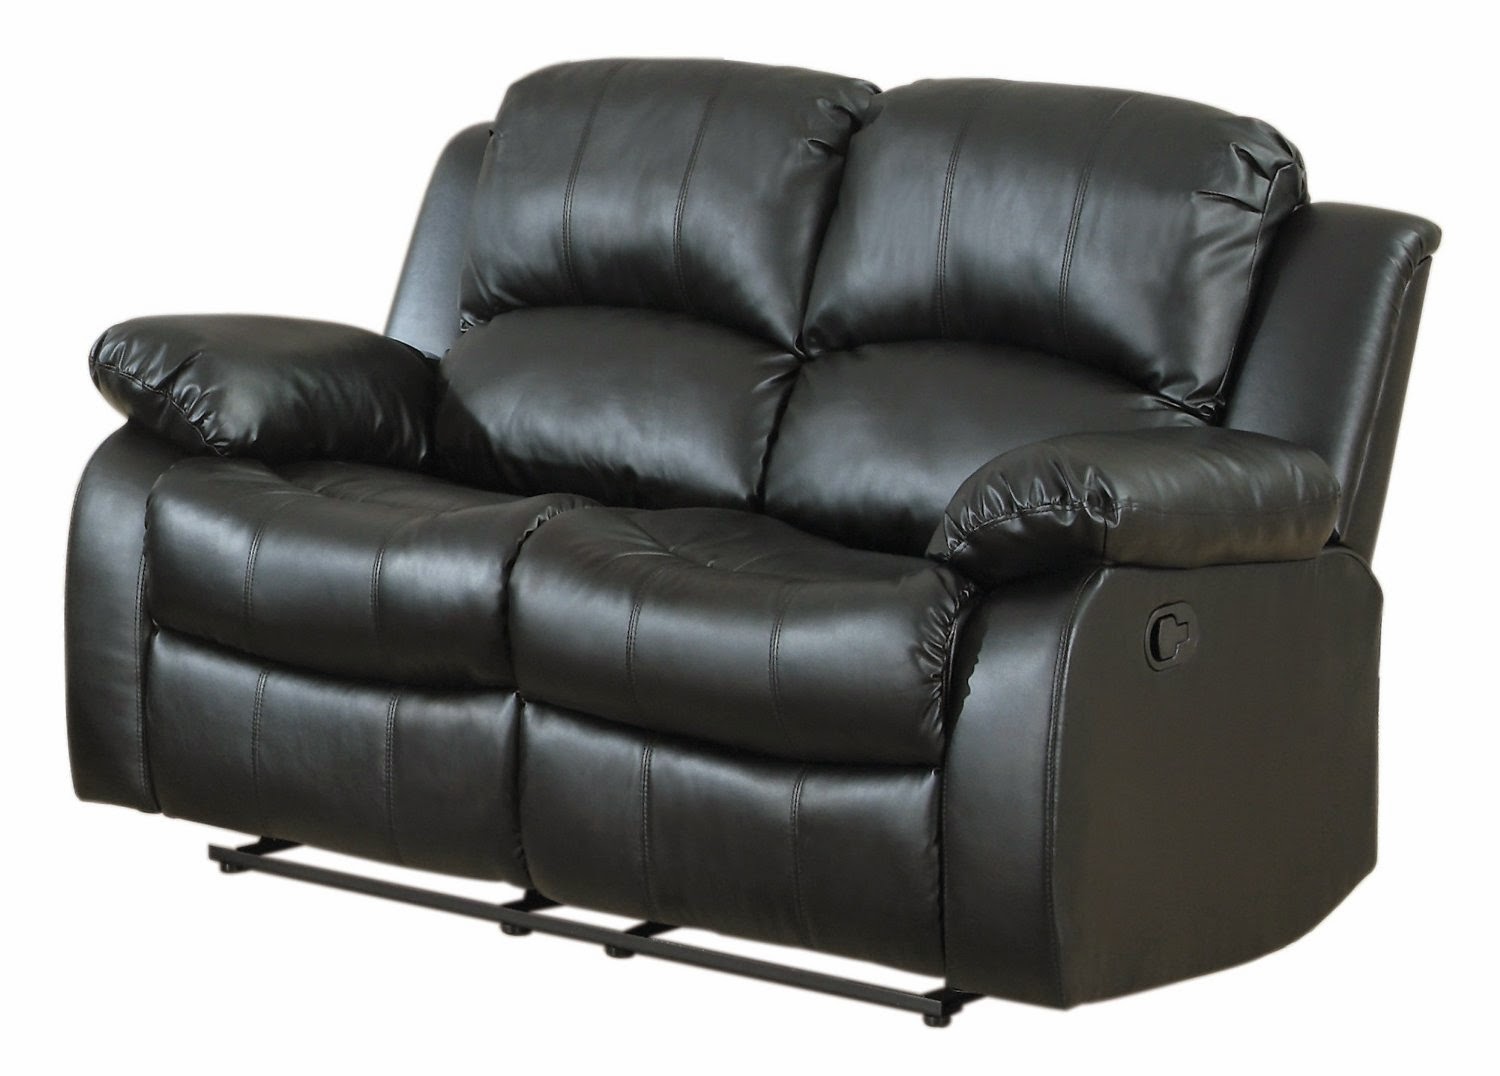 Cheap Recliner Sofas For Sale Black Leather Reclining